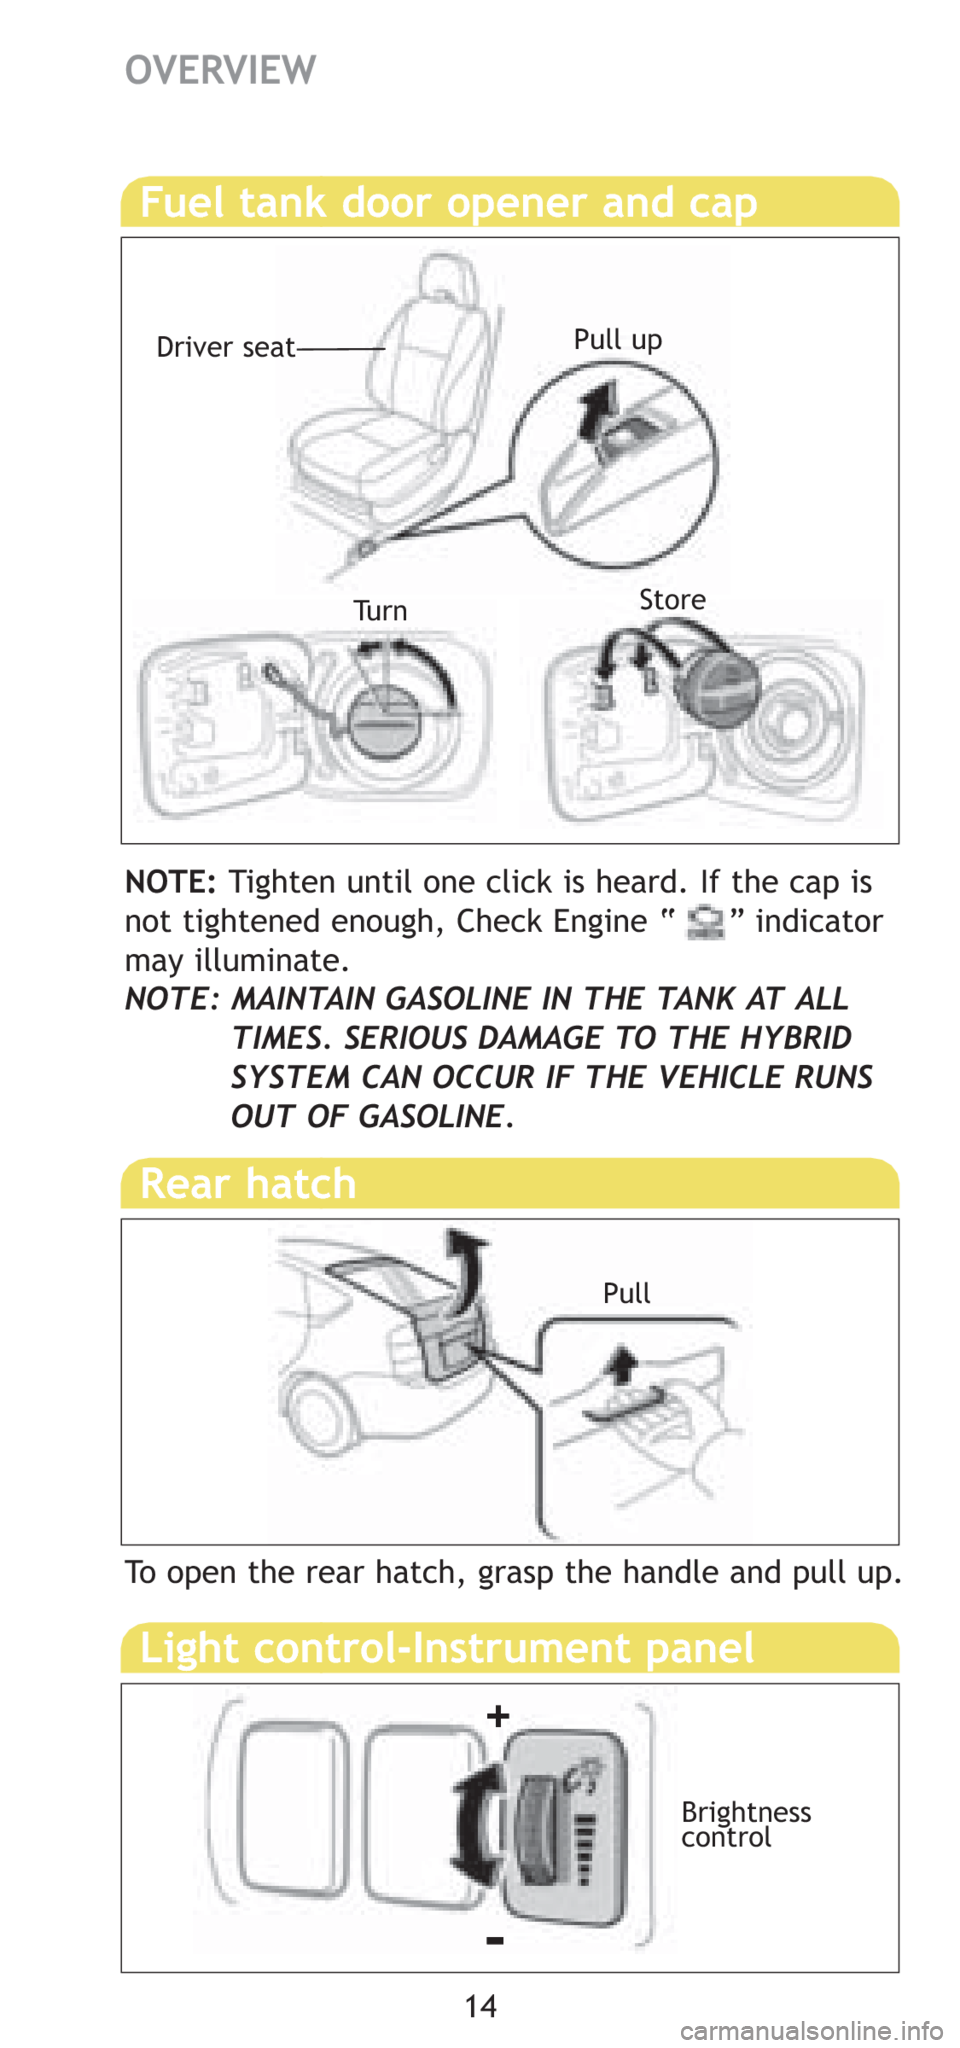 TOYOTA PRIUS 2008 2.G Quick Reference Guide 14
Rear hatch
Pull
NOTE:Tighten until one click is heard. If the cap is
not tightened enough, Check Engine “     ” indicator
may illuminate.
NOTE: MAINTAIN GASOLINE IN THE TANK AT ALL 
TIMES. SERI